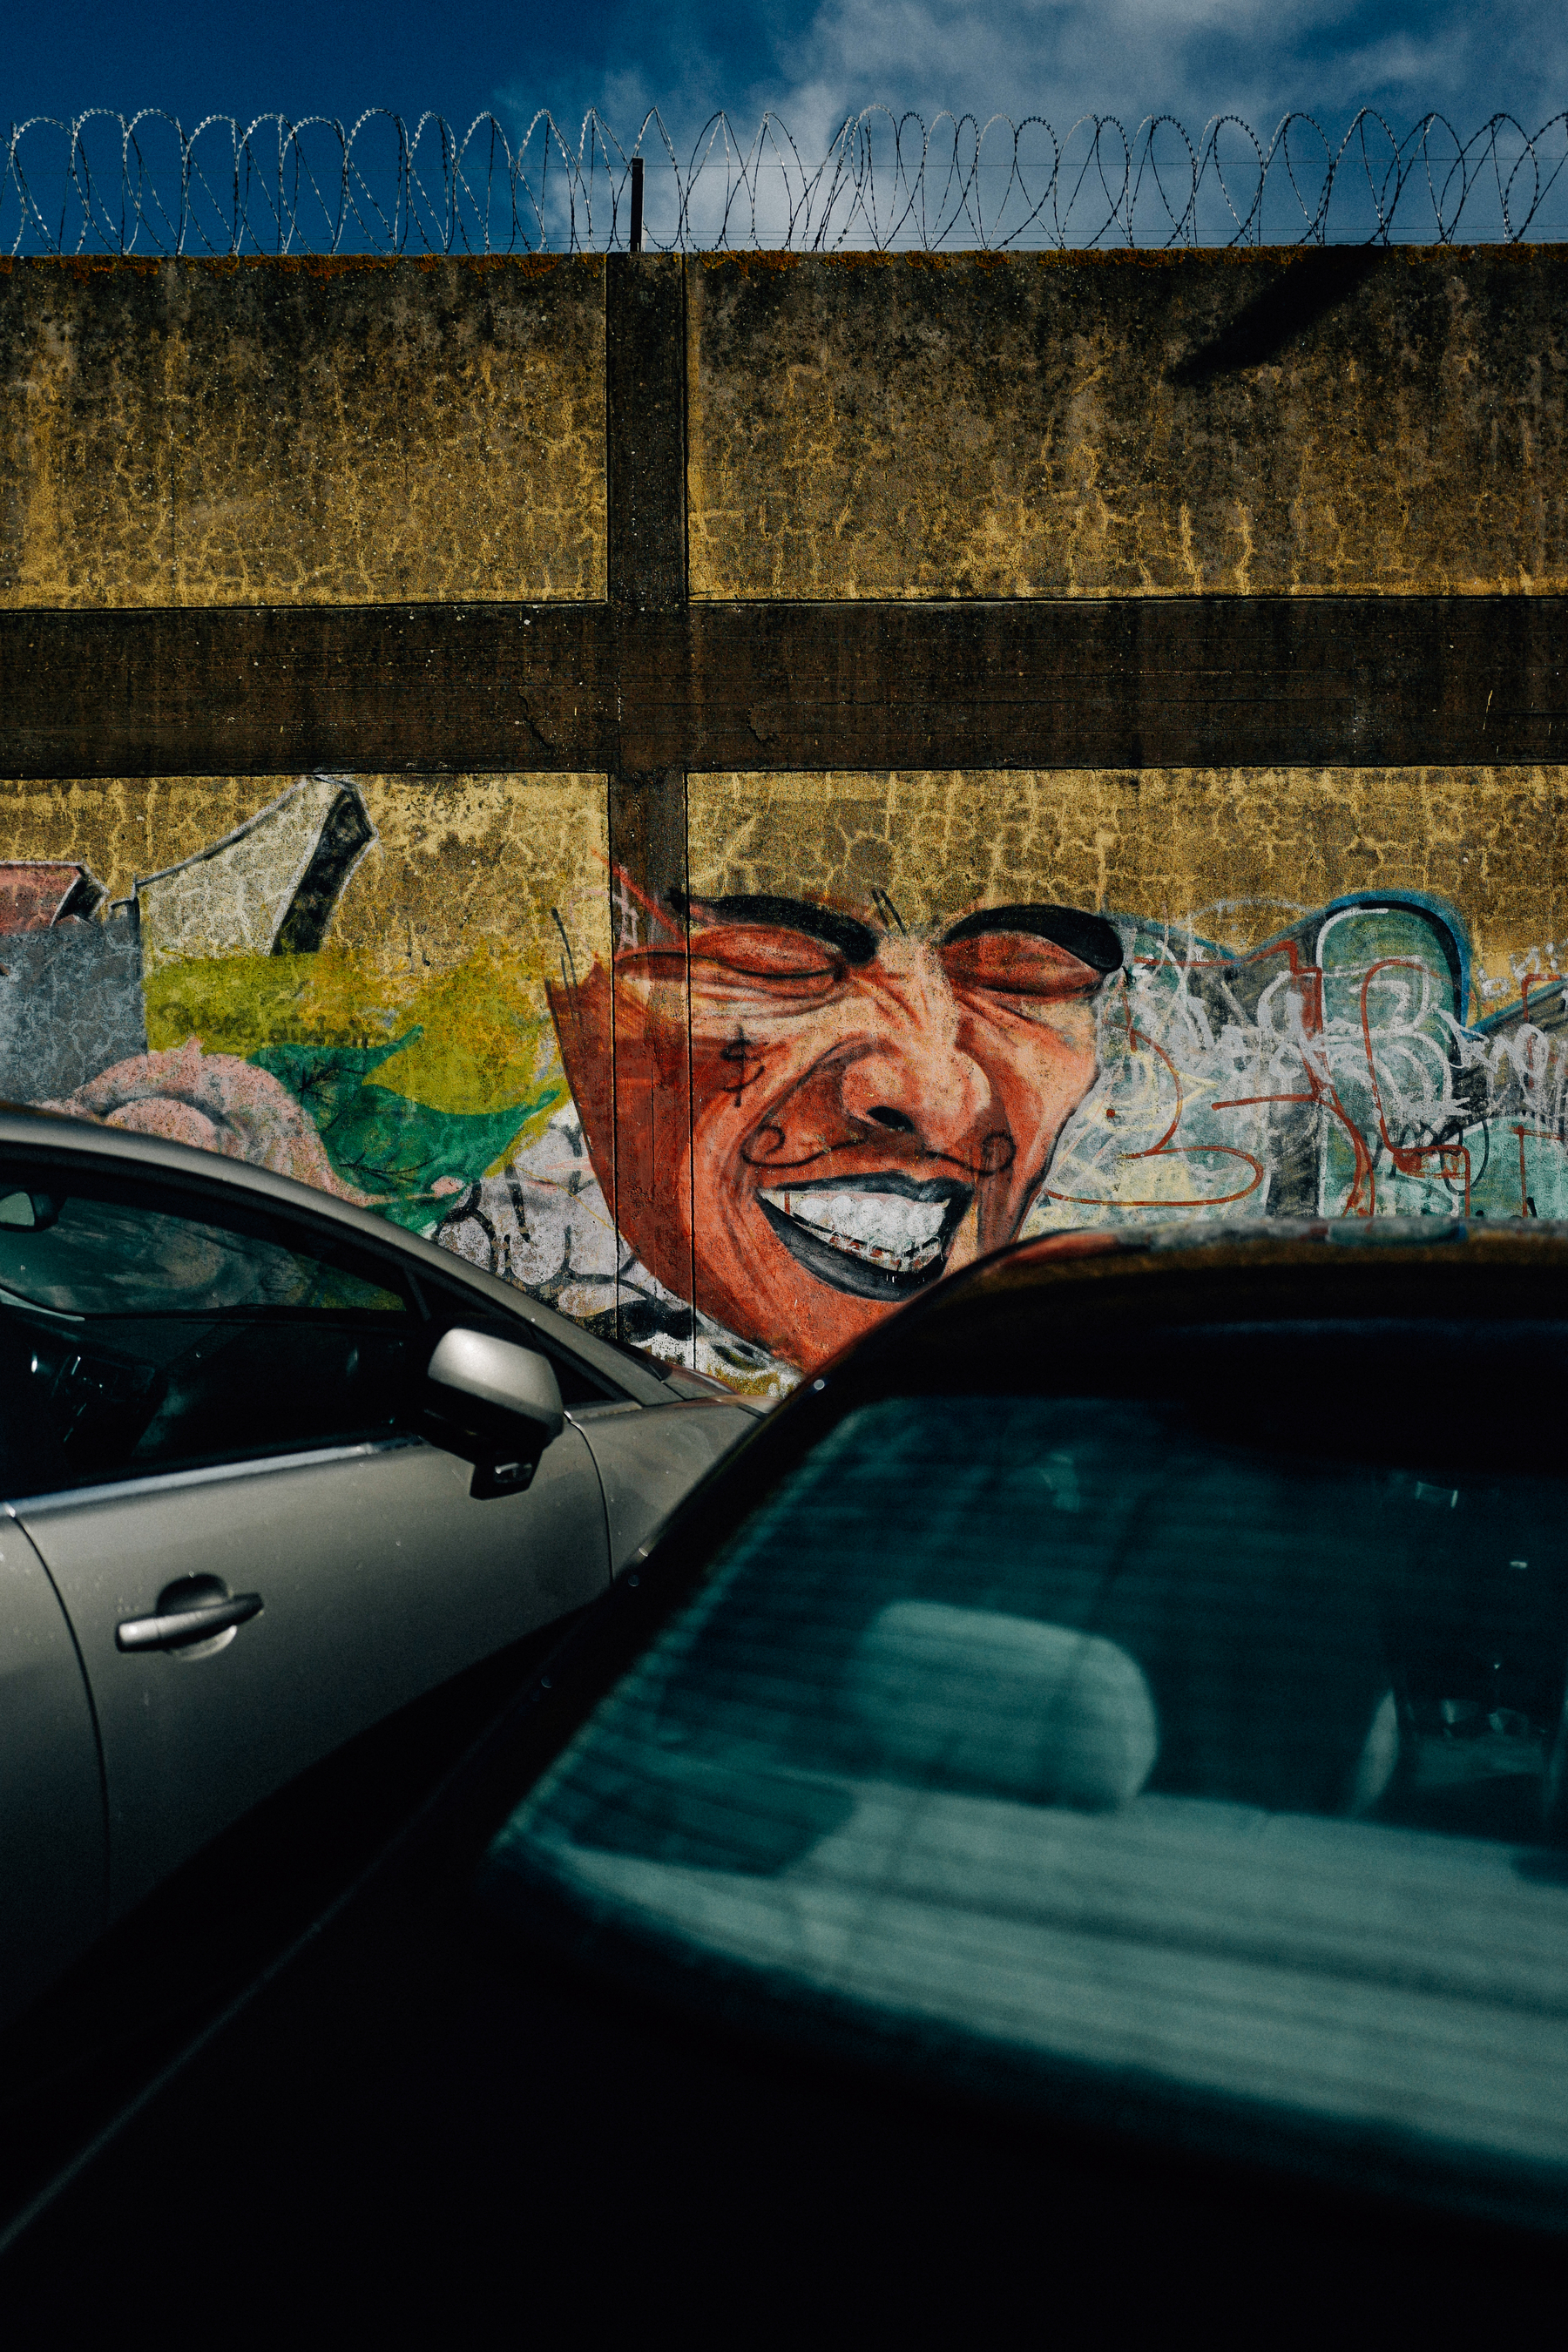 The image features a vibrant graffiti artwork of a face with an exaggerated expression on a wall, partially obscured by the top of two parked cars. The wall is topped with barbed wire, indicating a secured area. The overall tone is urban and gritty.